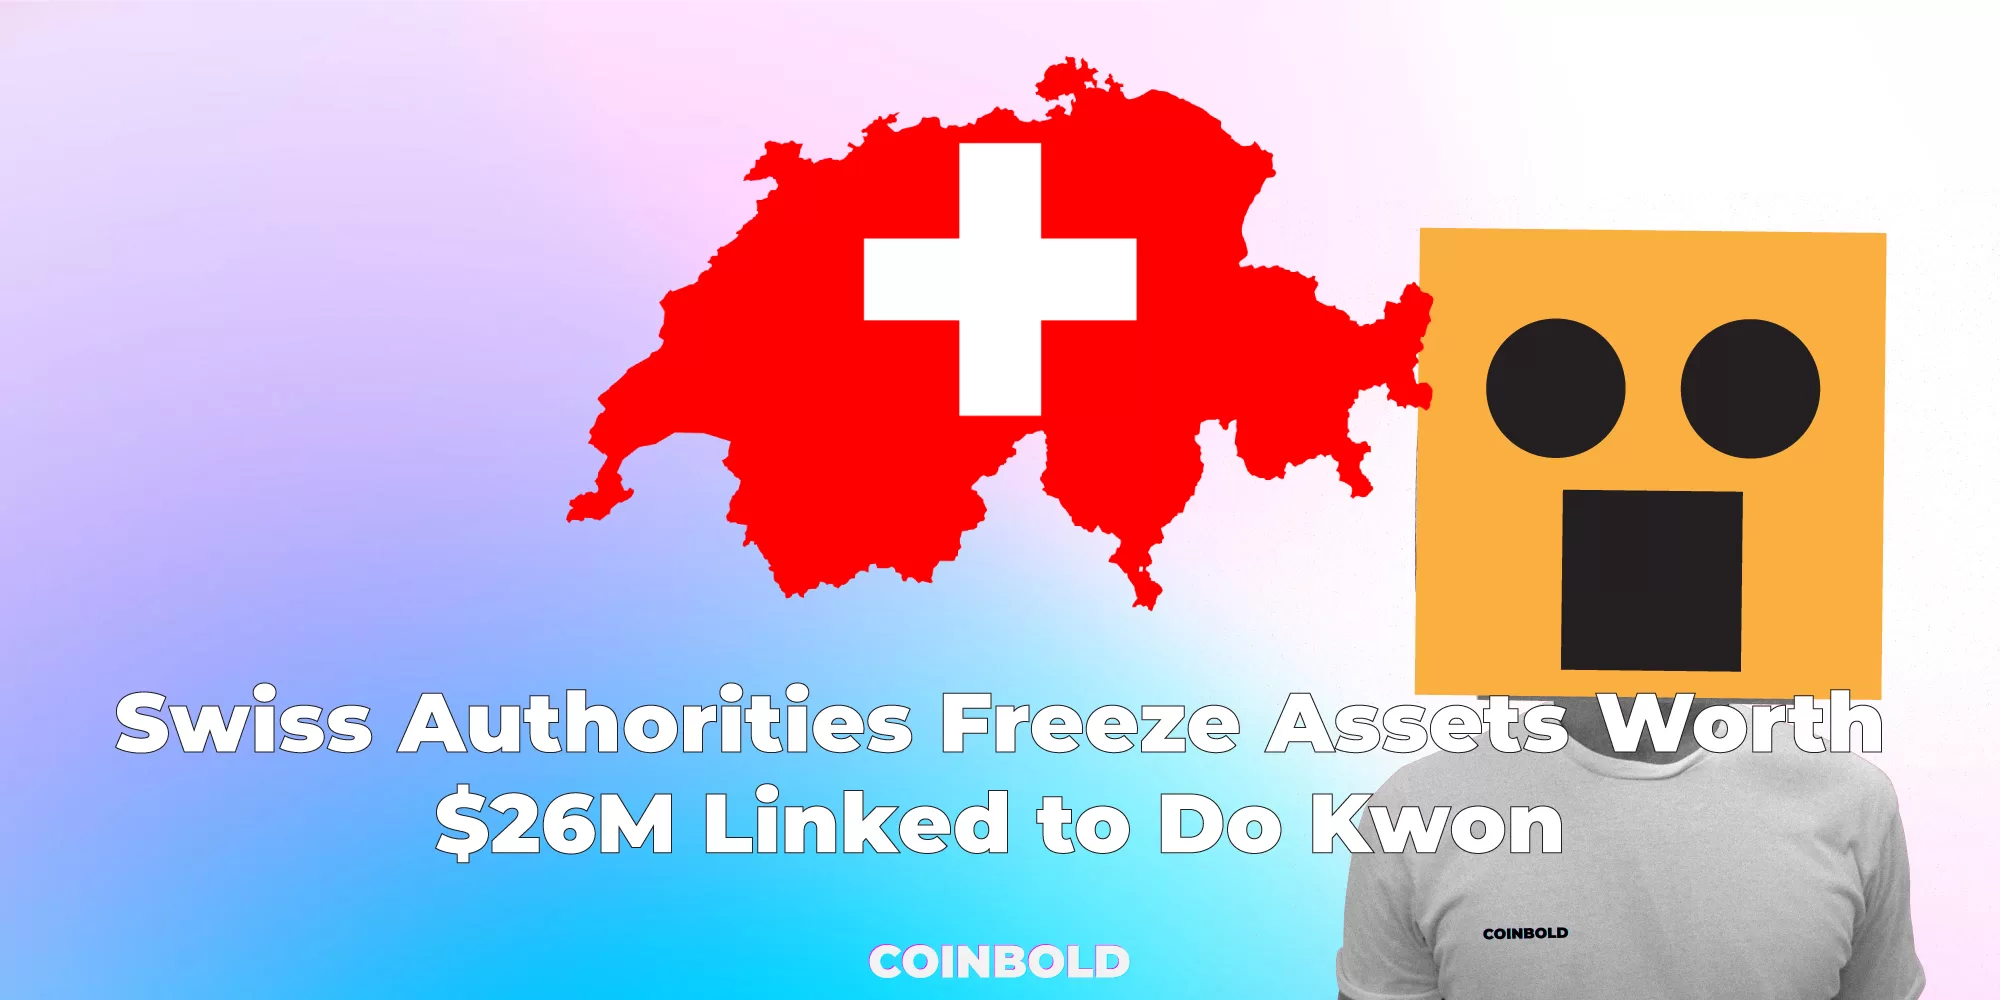 Swiss Authorities Freeze Assets Worth $26M Linked to Do Kwon